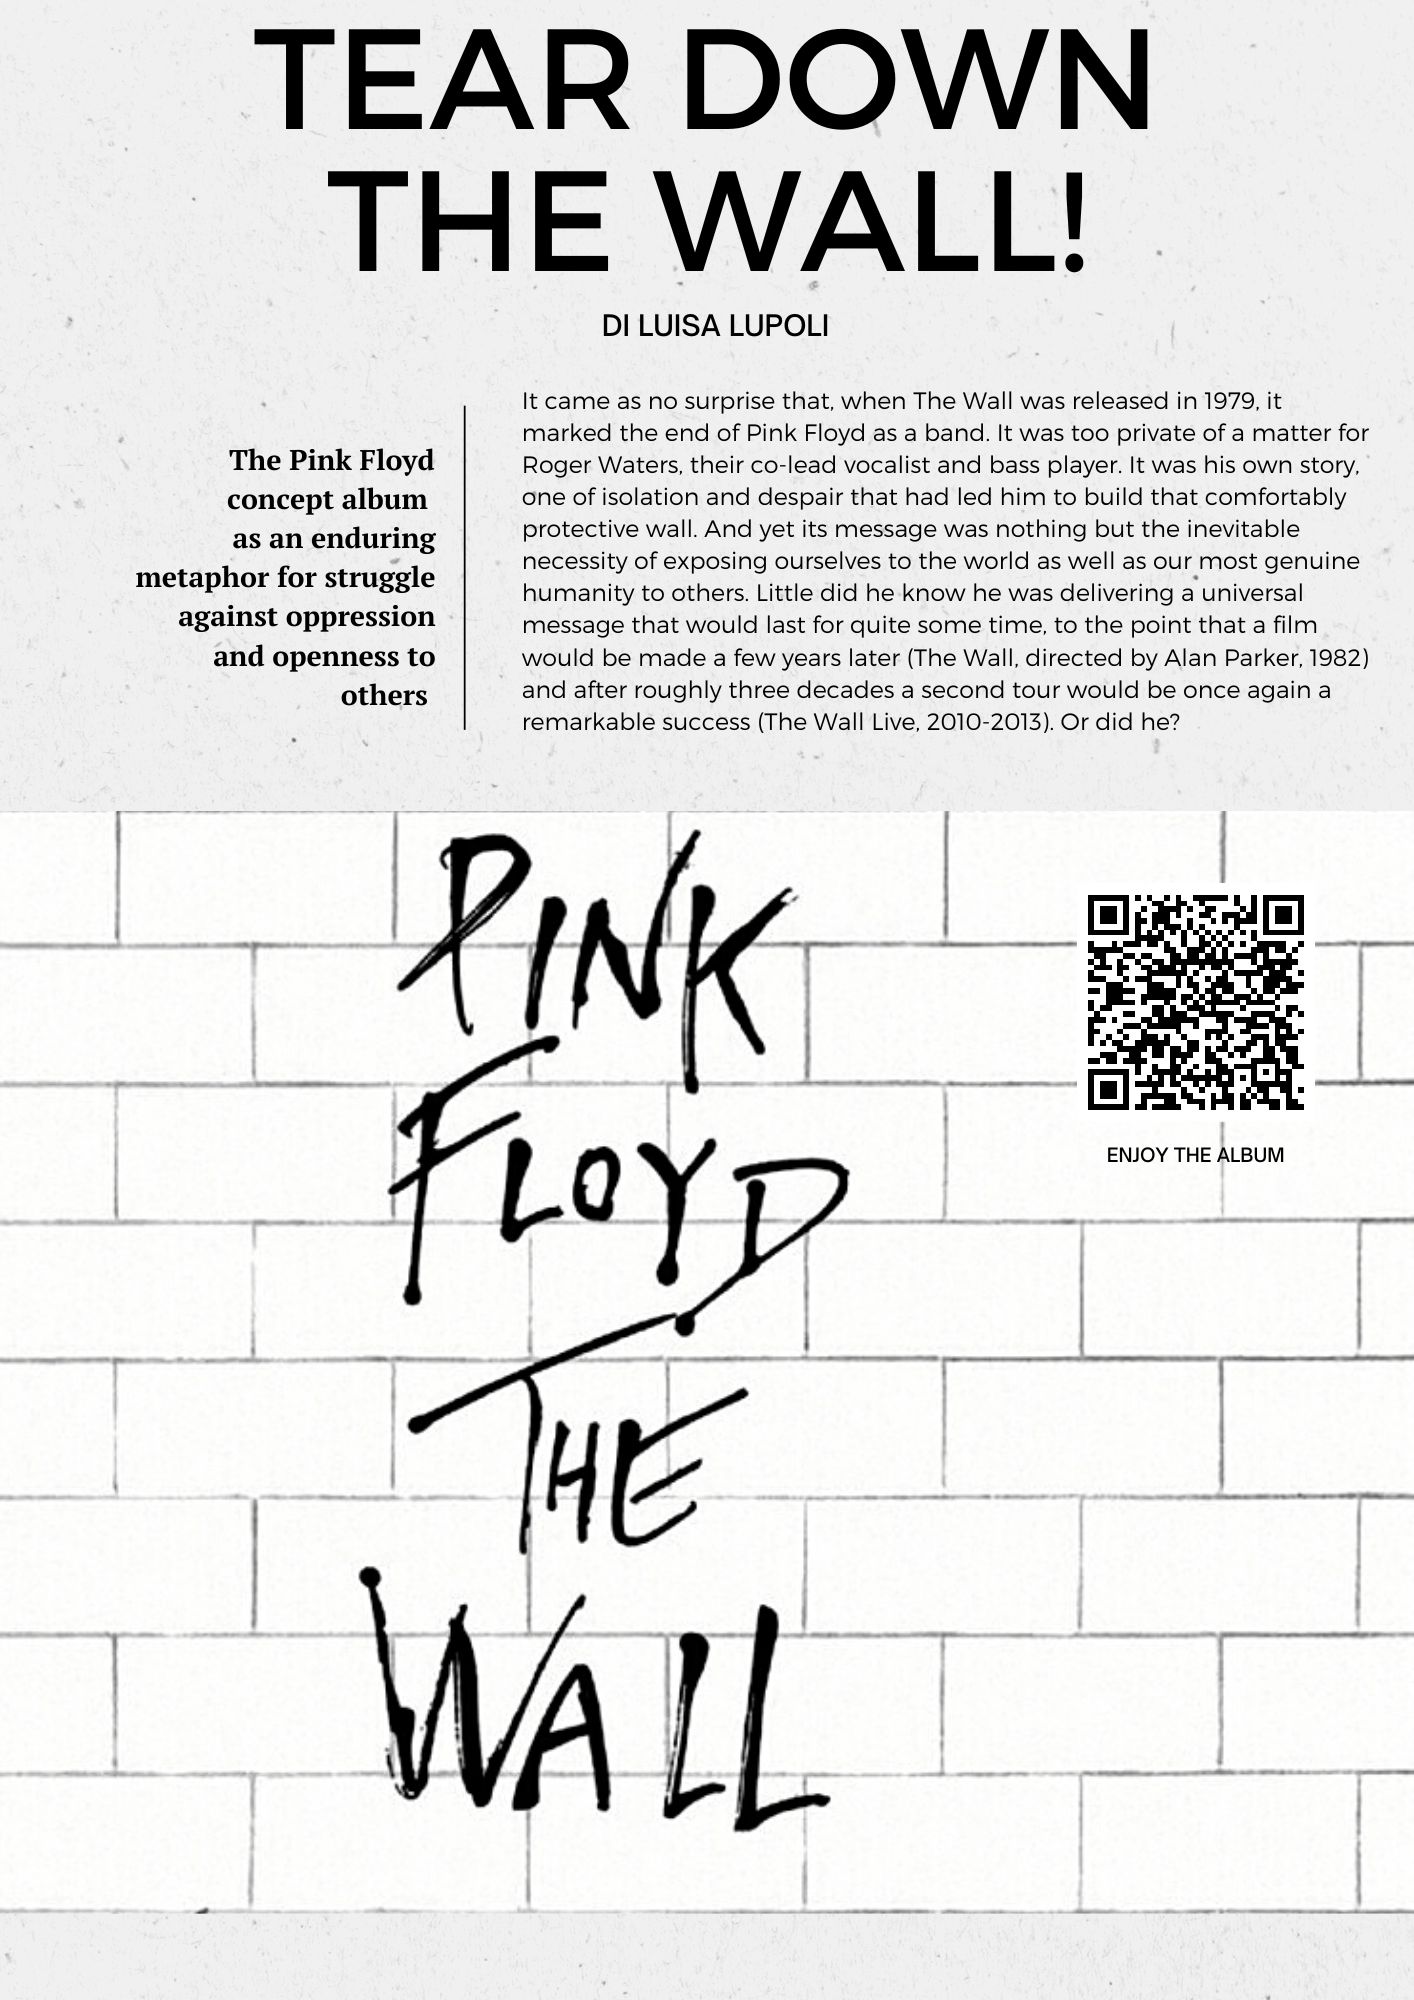 Tear down the wall! The Pink Floyd concept album  as an enduring metaphor for struggle against oppression and openness to others. Di Luisa Lupoli. t came as no surprise that, when The Wall was released in 1979, it marked the end of Pink Floyd as a band. It was too private of a matter for Roger Waters, their co-lead vocalist and bass player. It was his own story, one of isolation and despair that had led him to build that comfortably protective wall. And yet its message was nothing but the inevitable necessity of exposing ourselves to the world as well as our most genuine humanity to others. Little did he know he was delivering a universal message that would last for quite some time, to the point that a film would be made a few years later (The Wall, directed by Alan Parker, 1982) and after roughly three decades a second tour would be once again a remarkable success (The Wall Live, 2010-2013). Or did he?